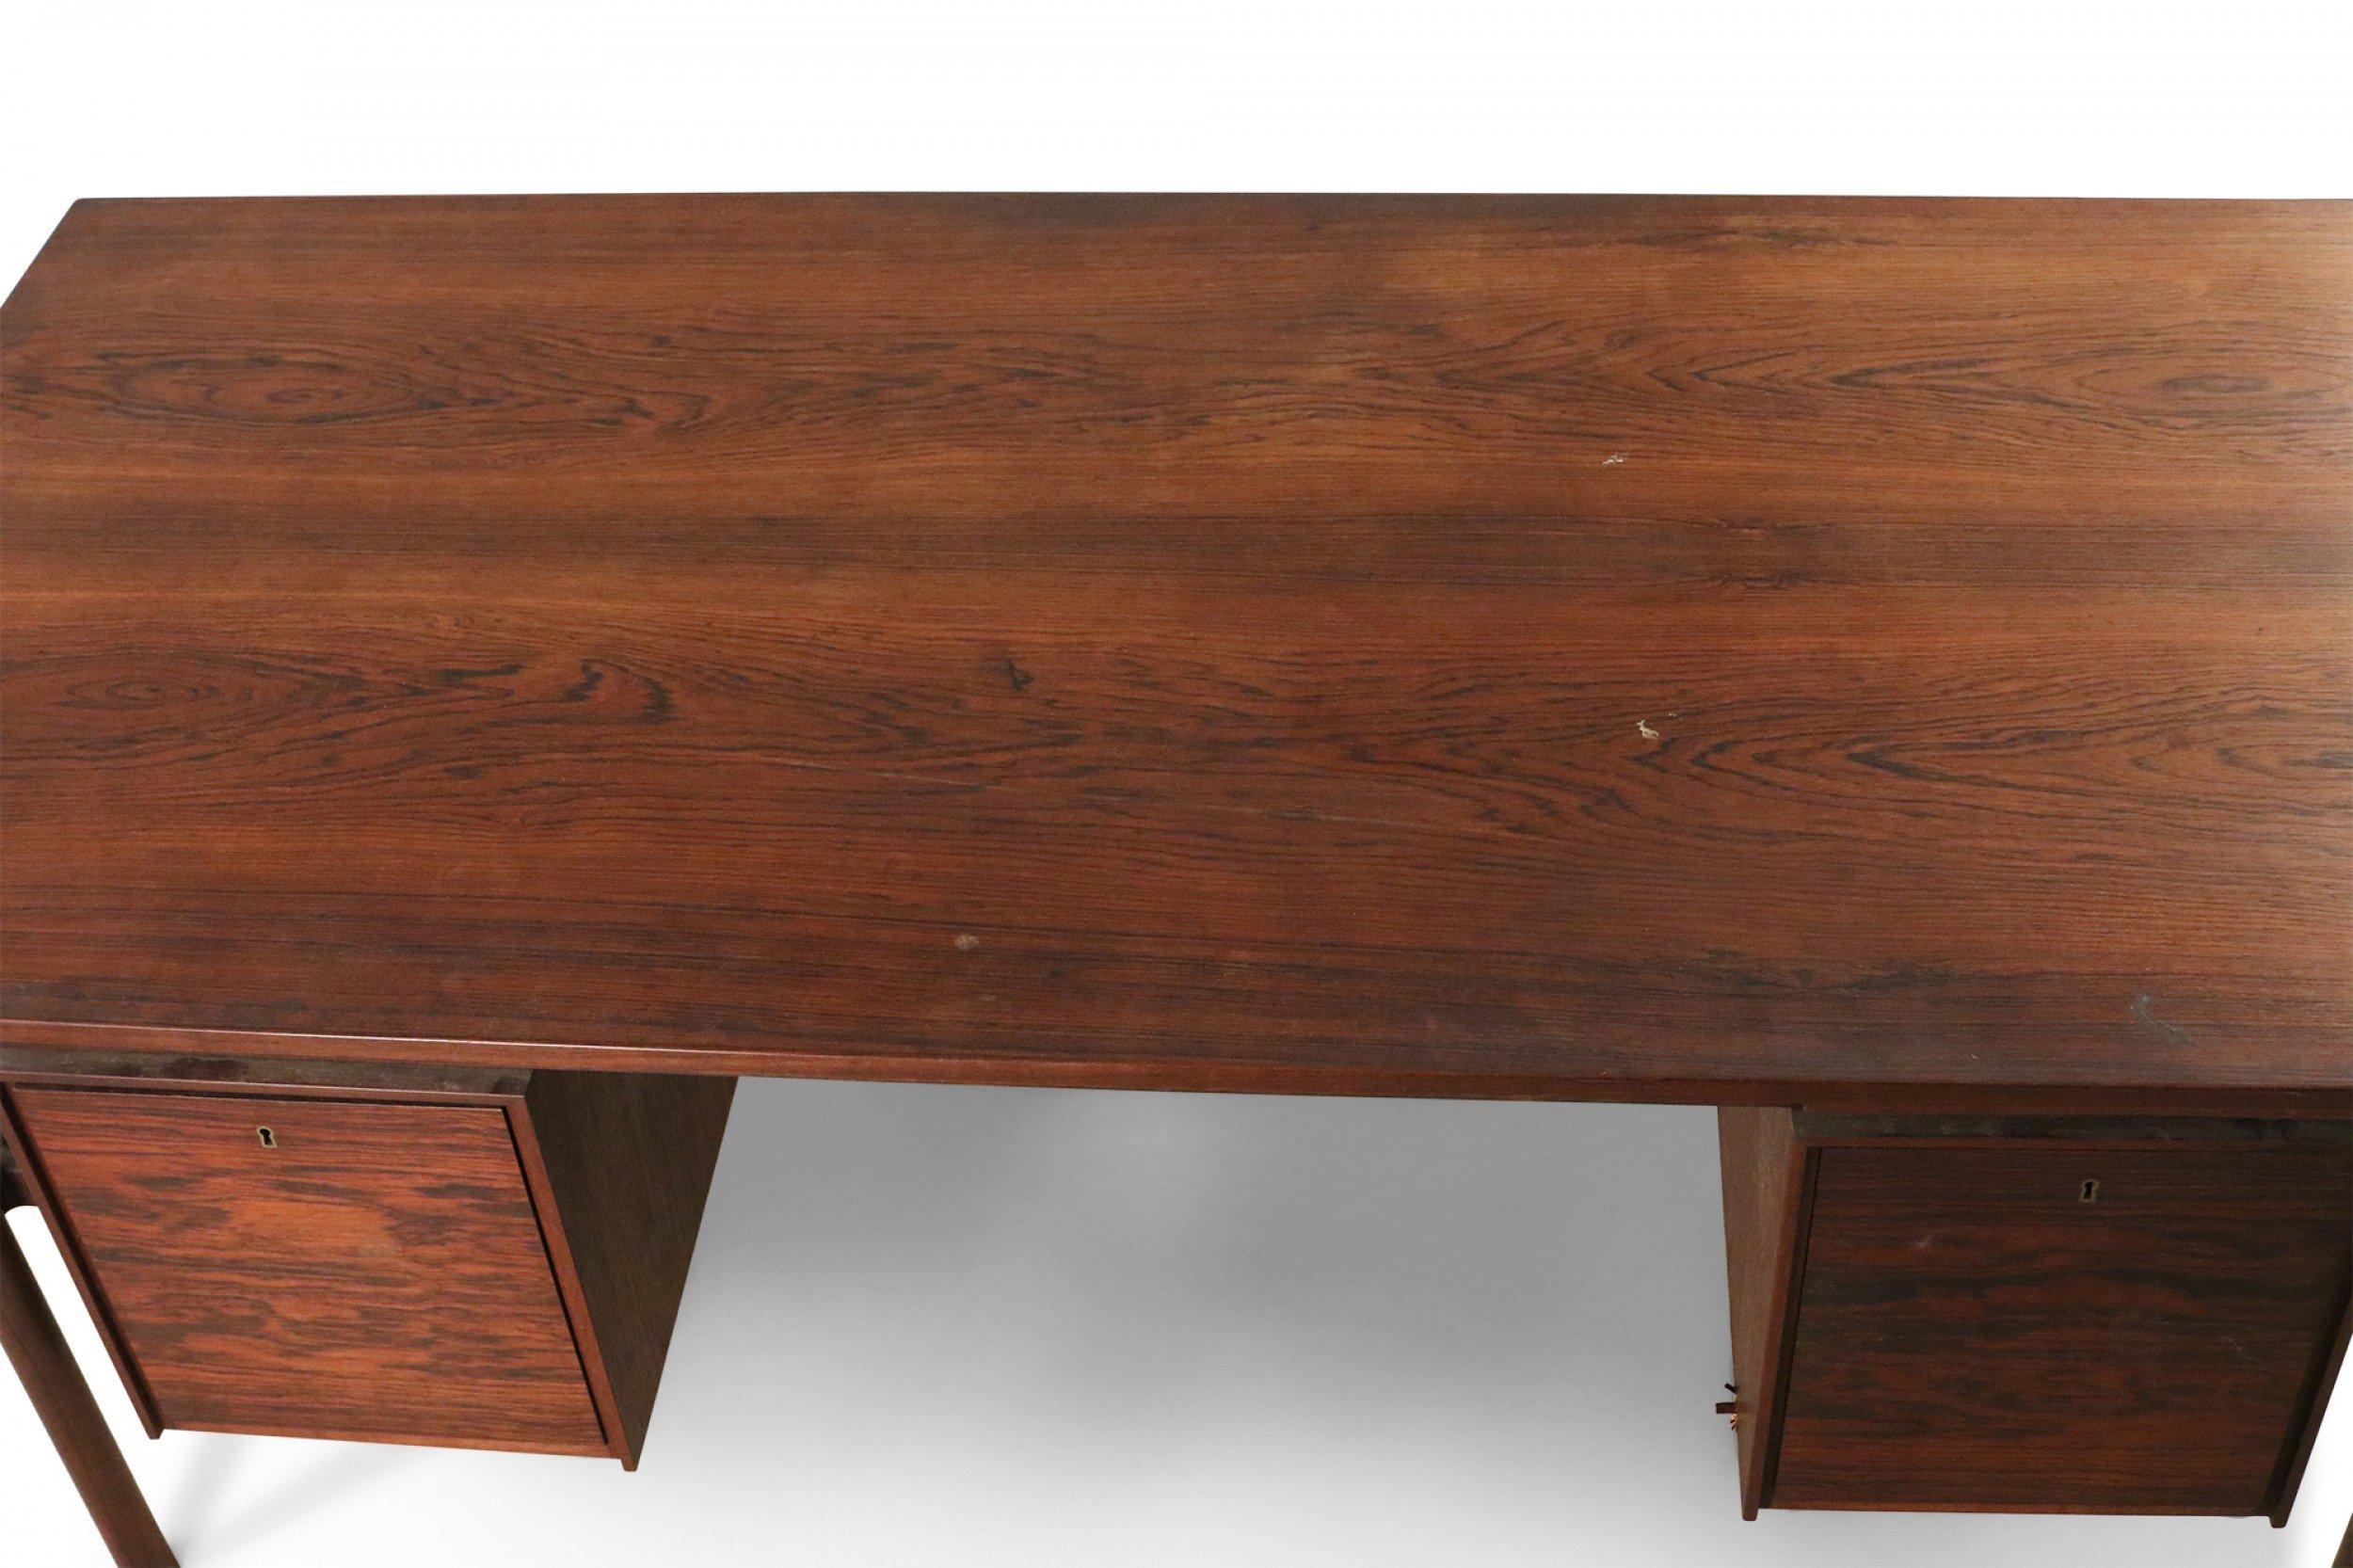 Mid-century Danish teak desk with rectangular top and two sets of drawers float-mounted under the desktop (2 drawers on left, 3 drawers on right).
  